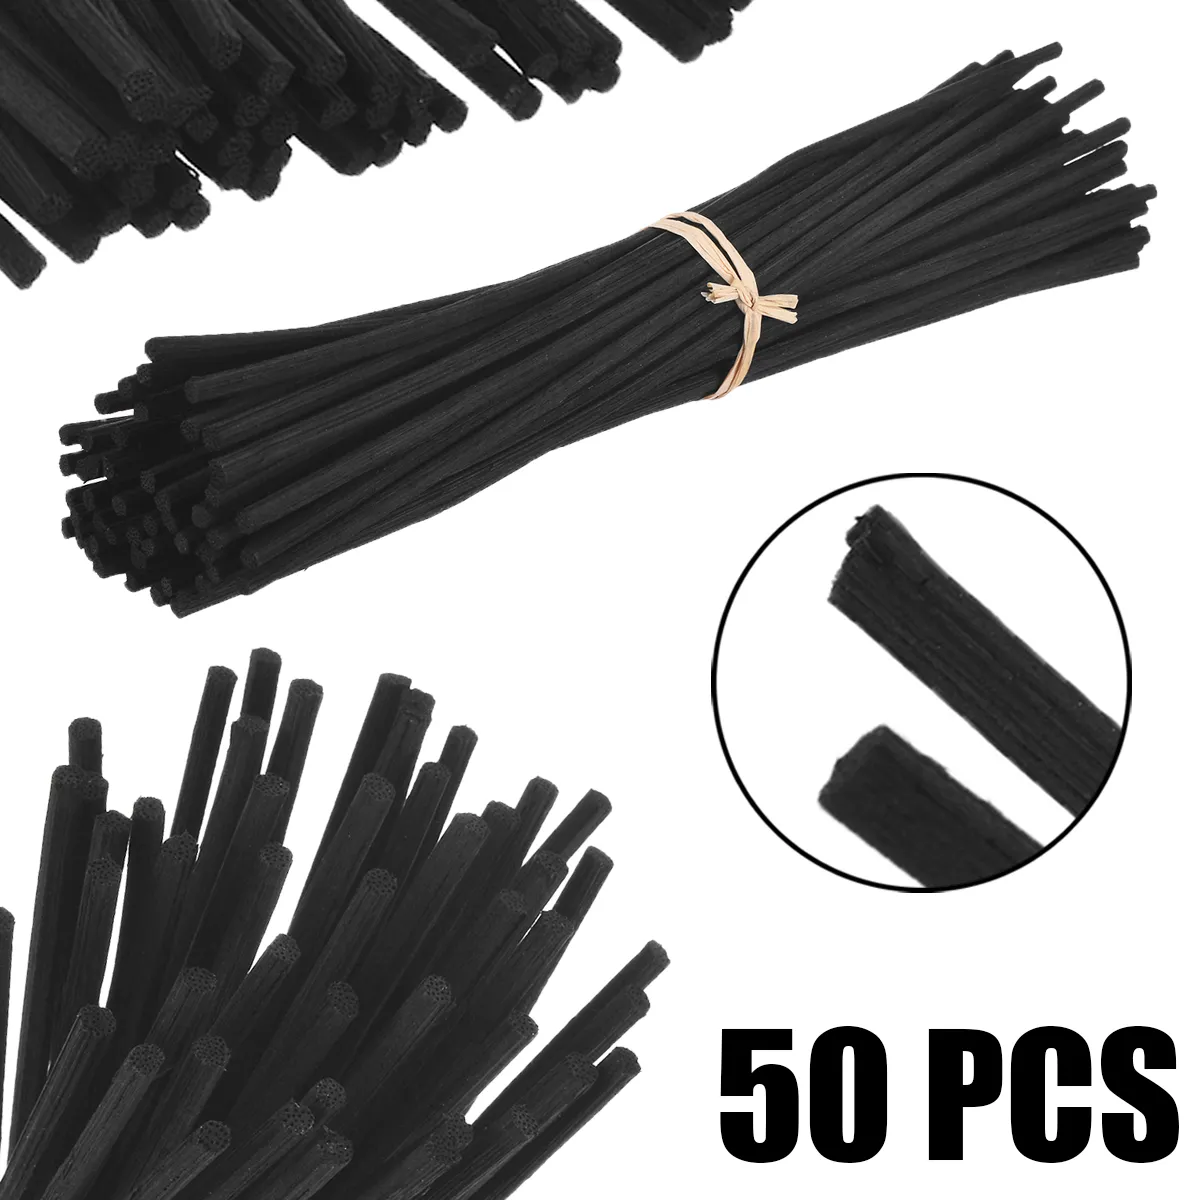 50pcs Mayitr Black Fragrance Oil Diffuser Rattan Reed Replacement Stick Bedroom Bathroom Home Decor